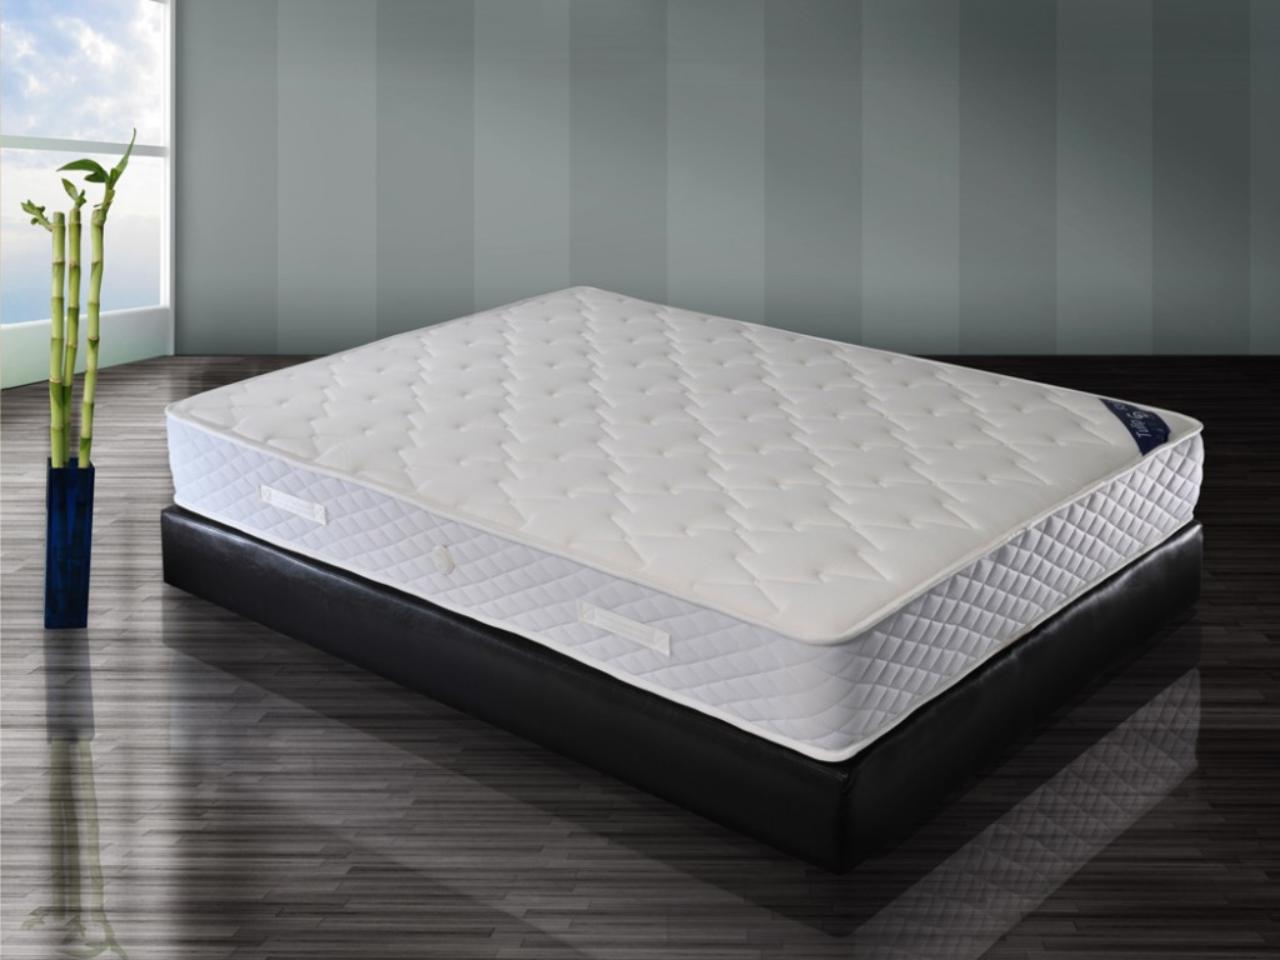 Buy on a board in Israel: Mattresses with varying degrees of rigidity